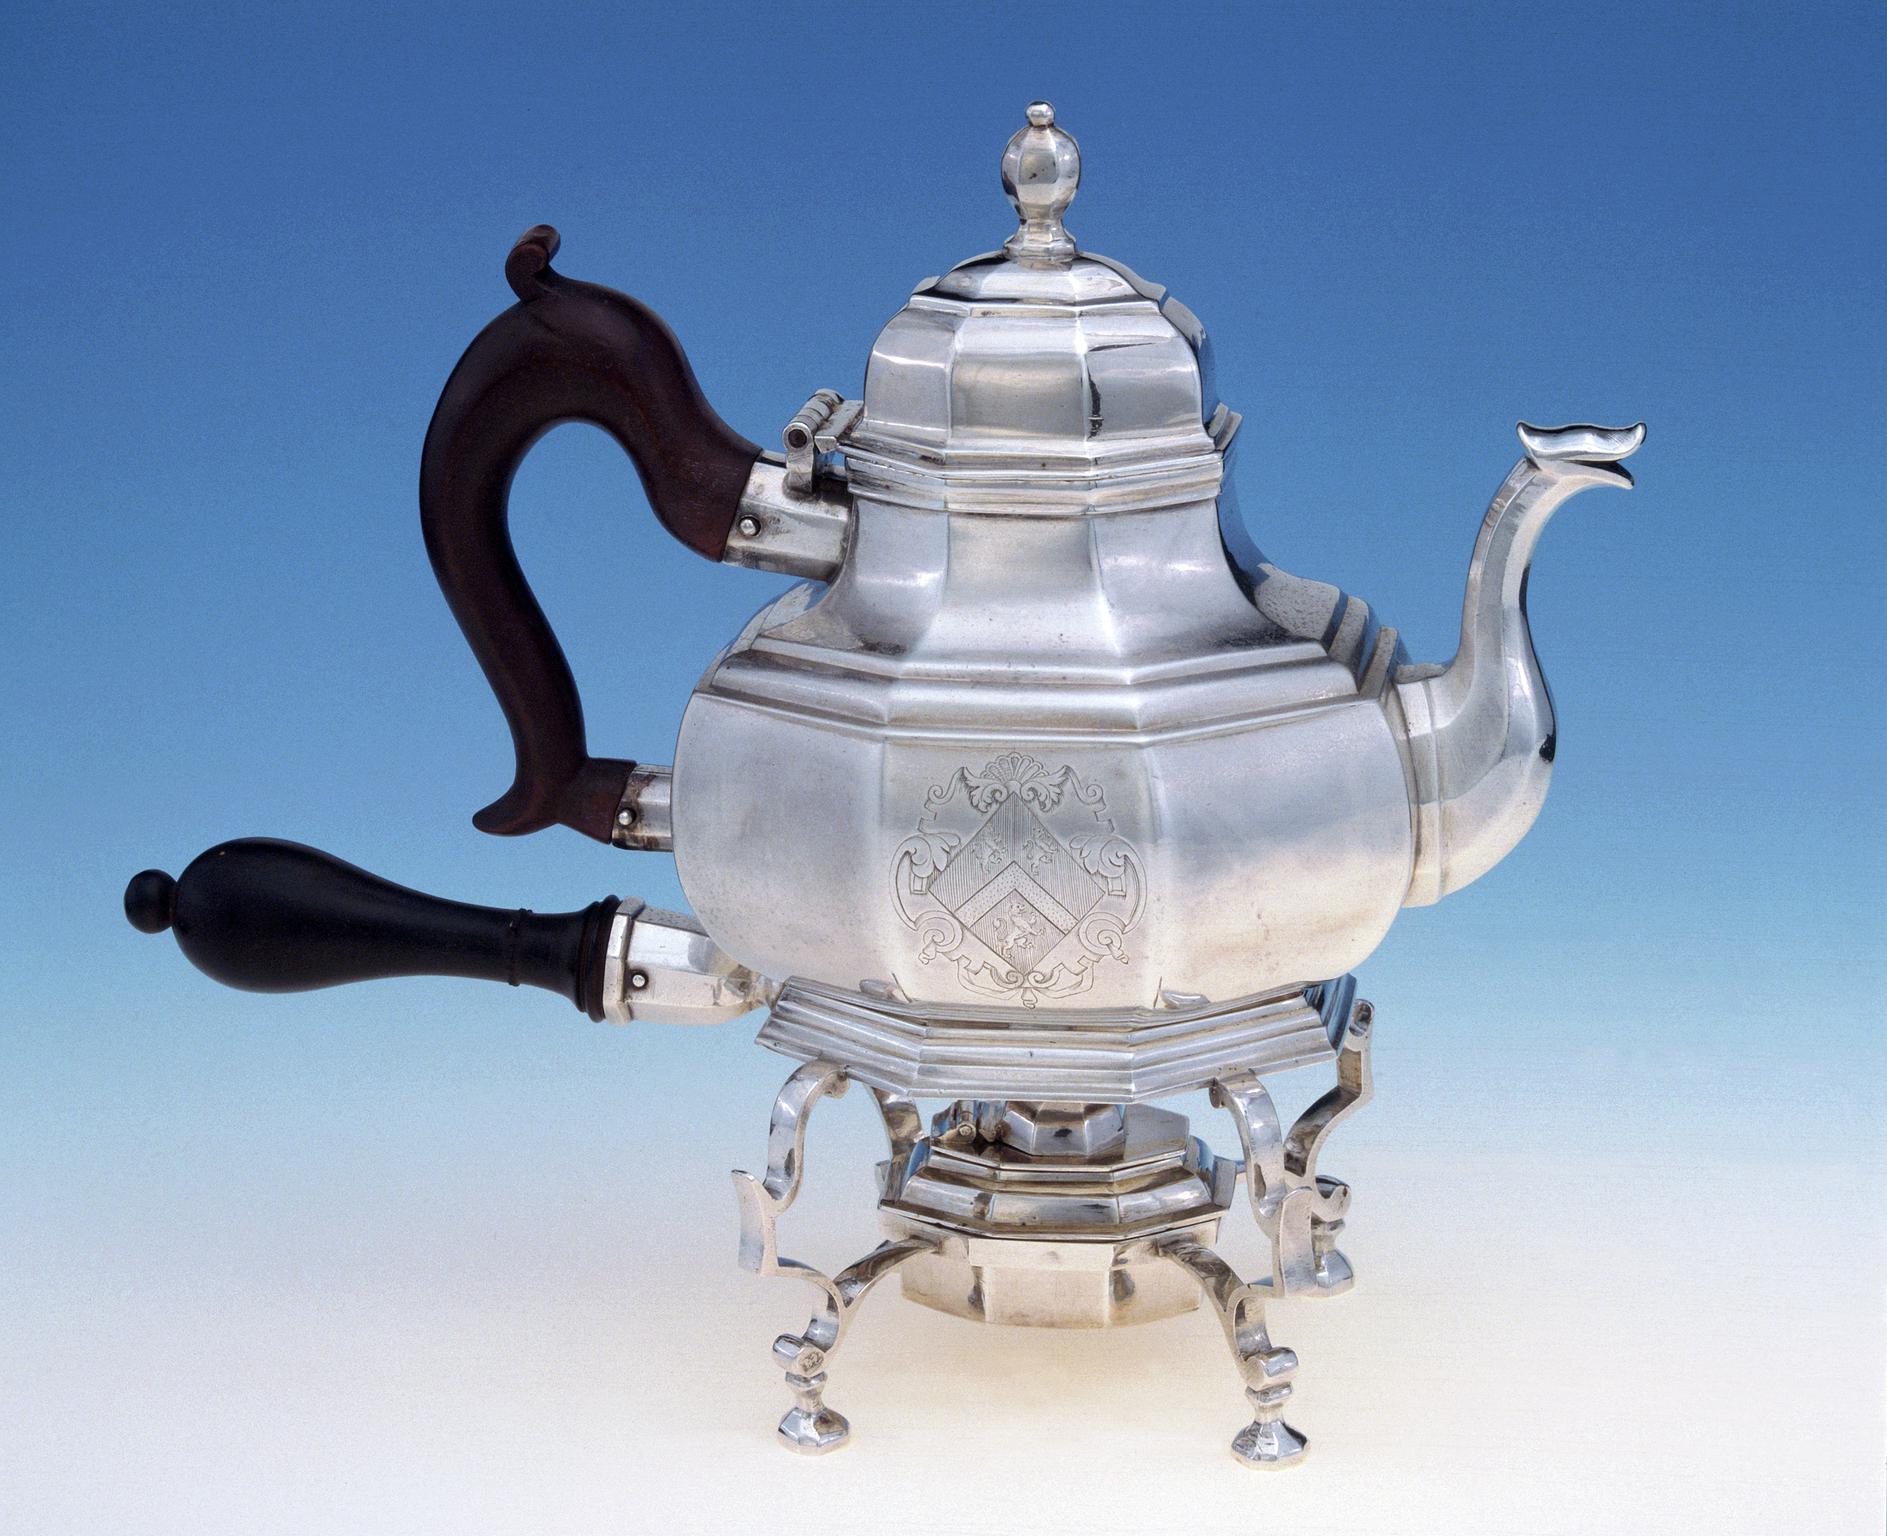 Teapot stand and lamp